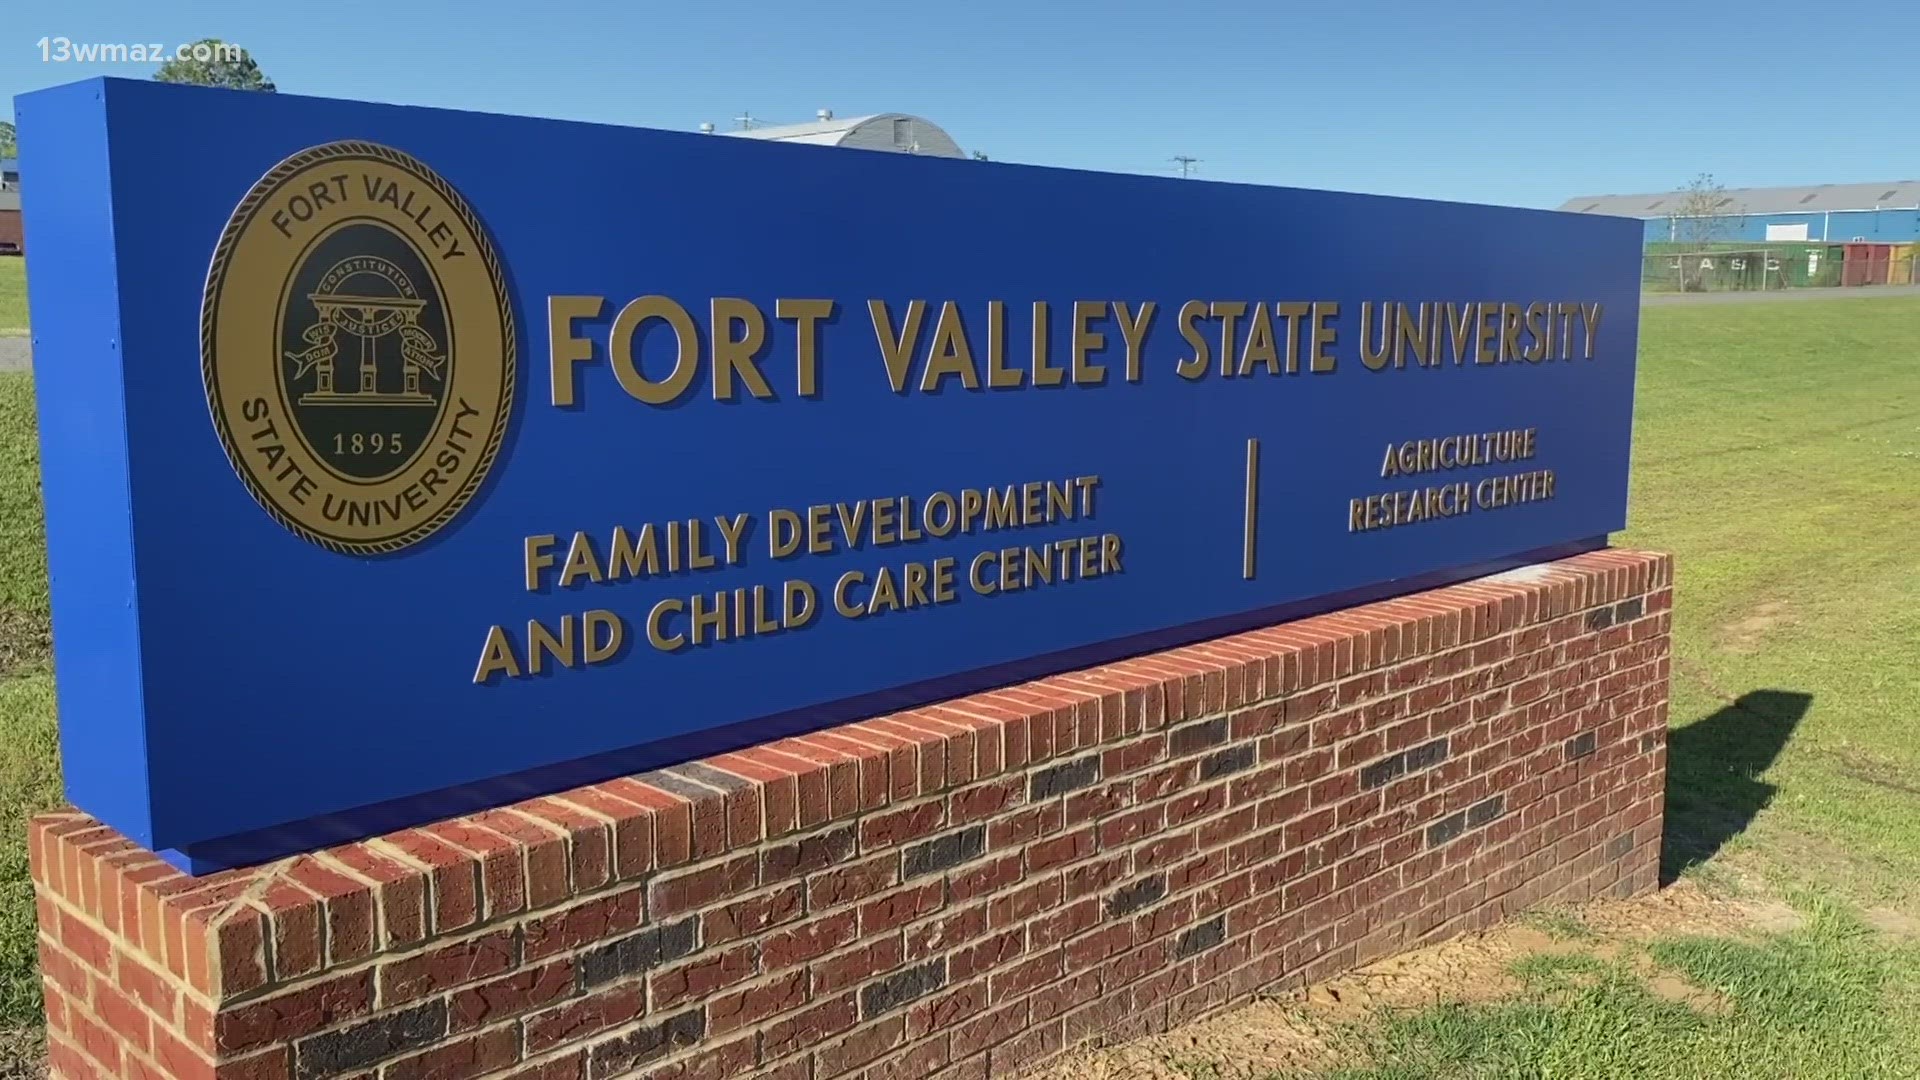 The U.S. Department of Agriculture's Deputy Secretary and a U.S. Congressman went to Fort Valley State to speak with students about having a career in agriculture.